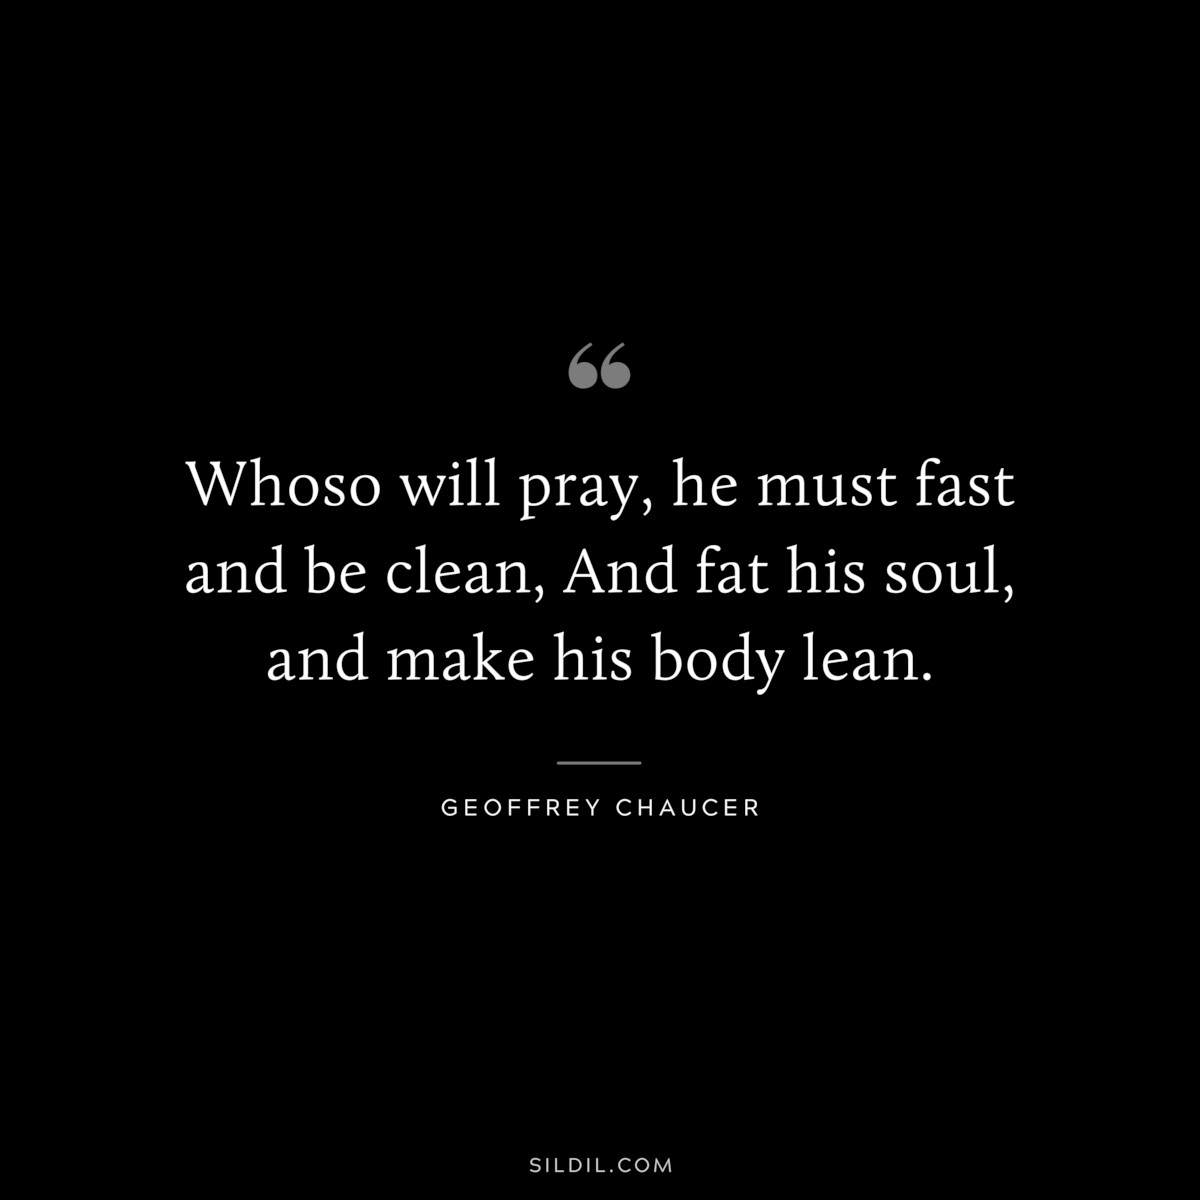 Whoso will pray, he must fast and be clean, And fat his soul, and make his body lean. ― Geoffrey Chaucer